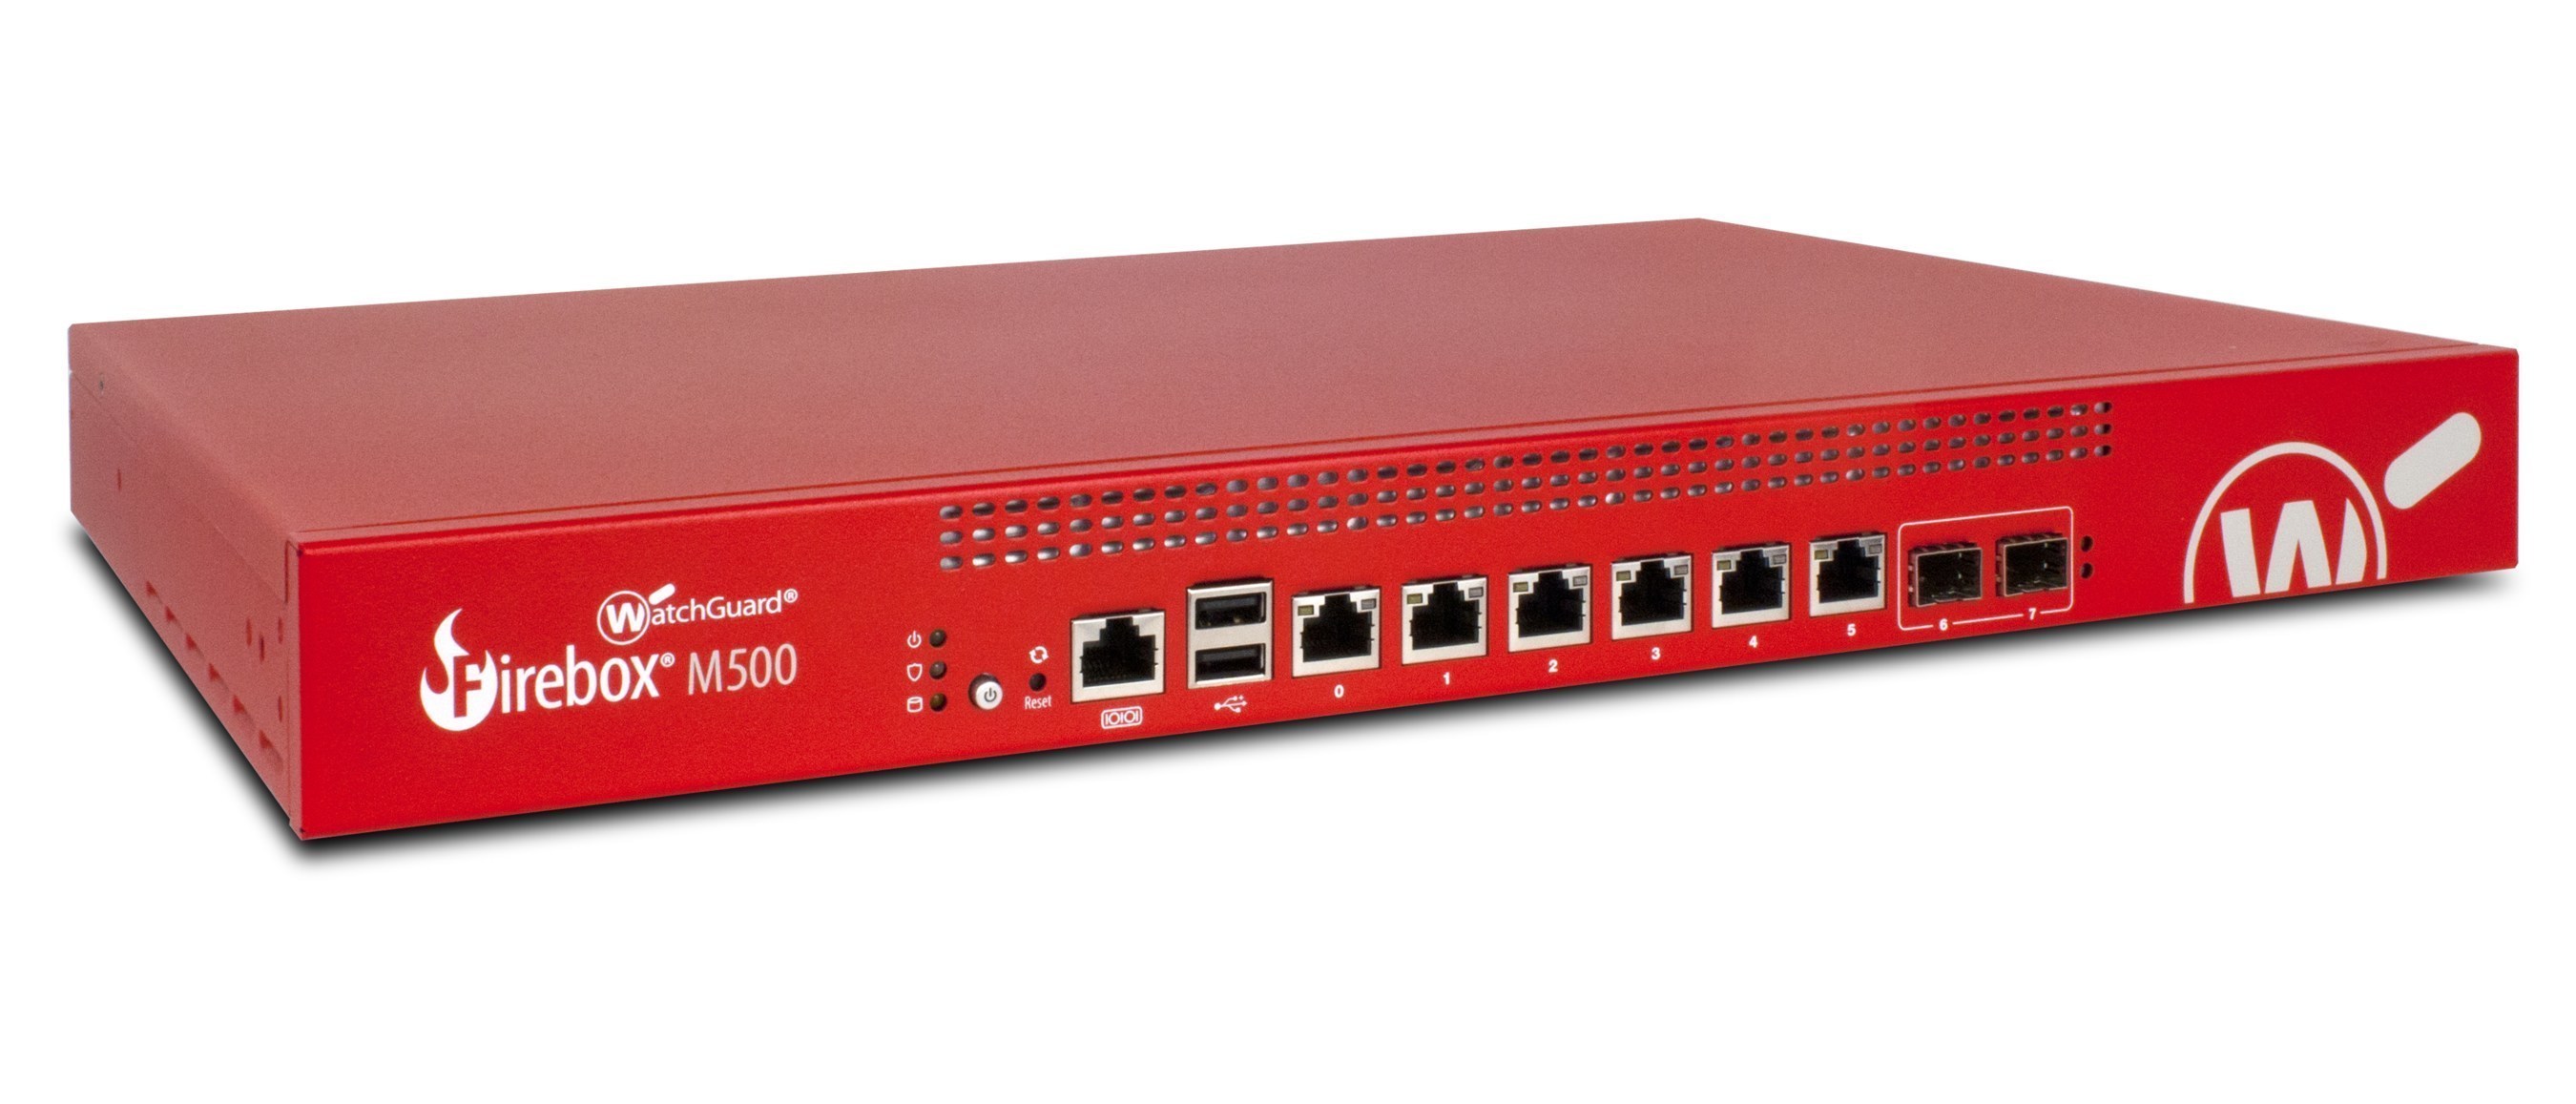 Cyber Defense Magazine names WatchGuard Firebox M500 Most Innovative Firewall; Award continues firewall's streak of recognition for ability to inspect encrypted traffic 149 percent faster than competing solutions.